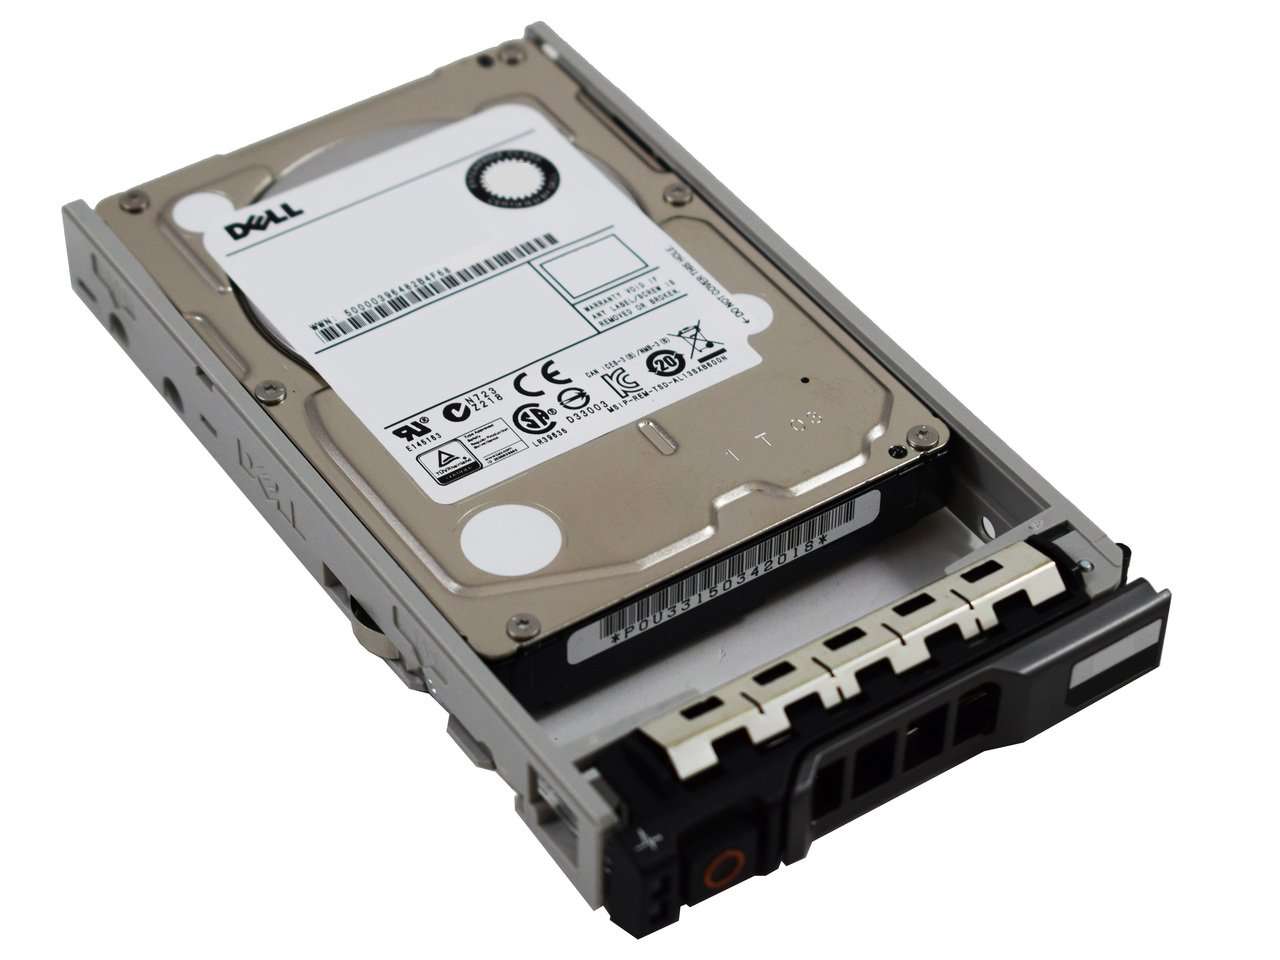 Dell G13 0P6NW6 600GB 10K RPM SAS 6Gb/s 512n 2.5" Manufacturer Recertified HDD